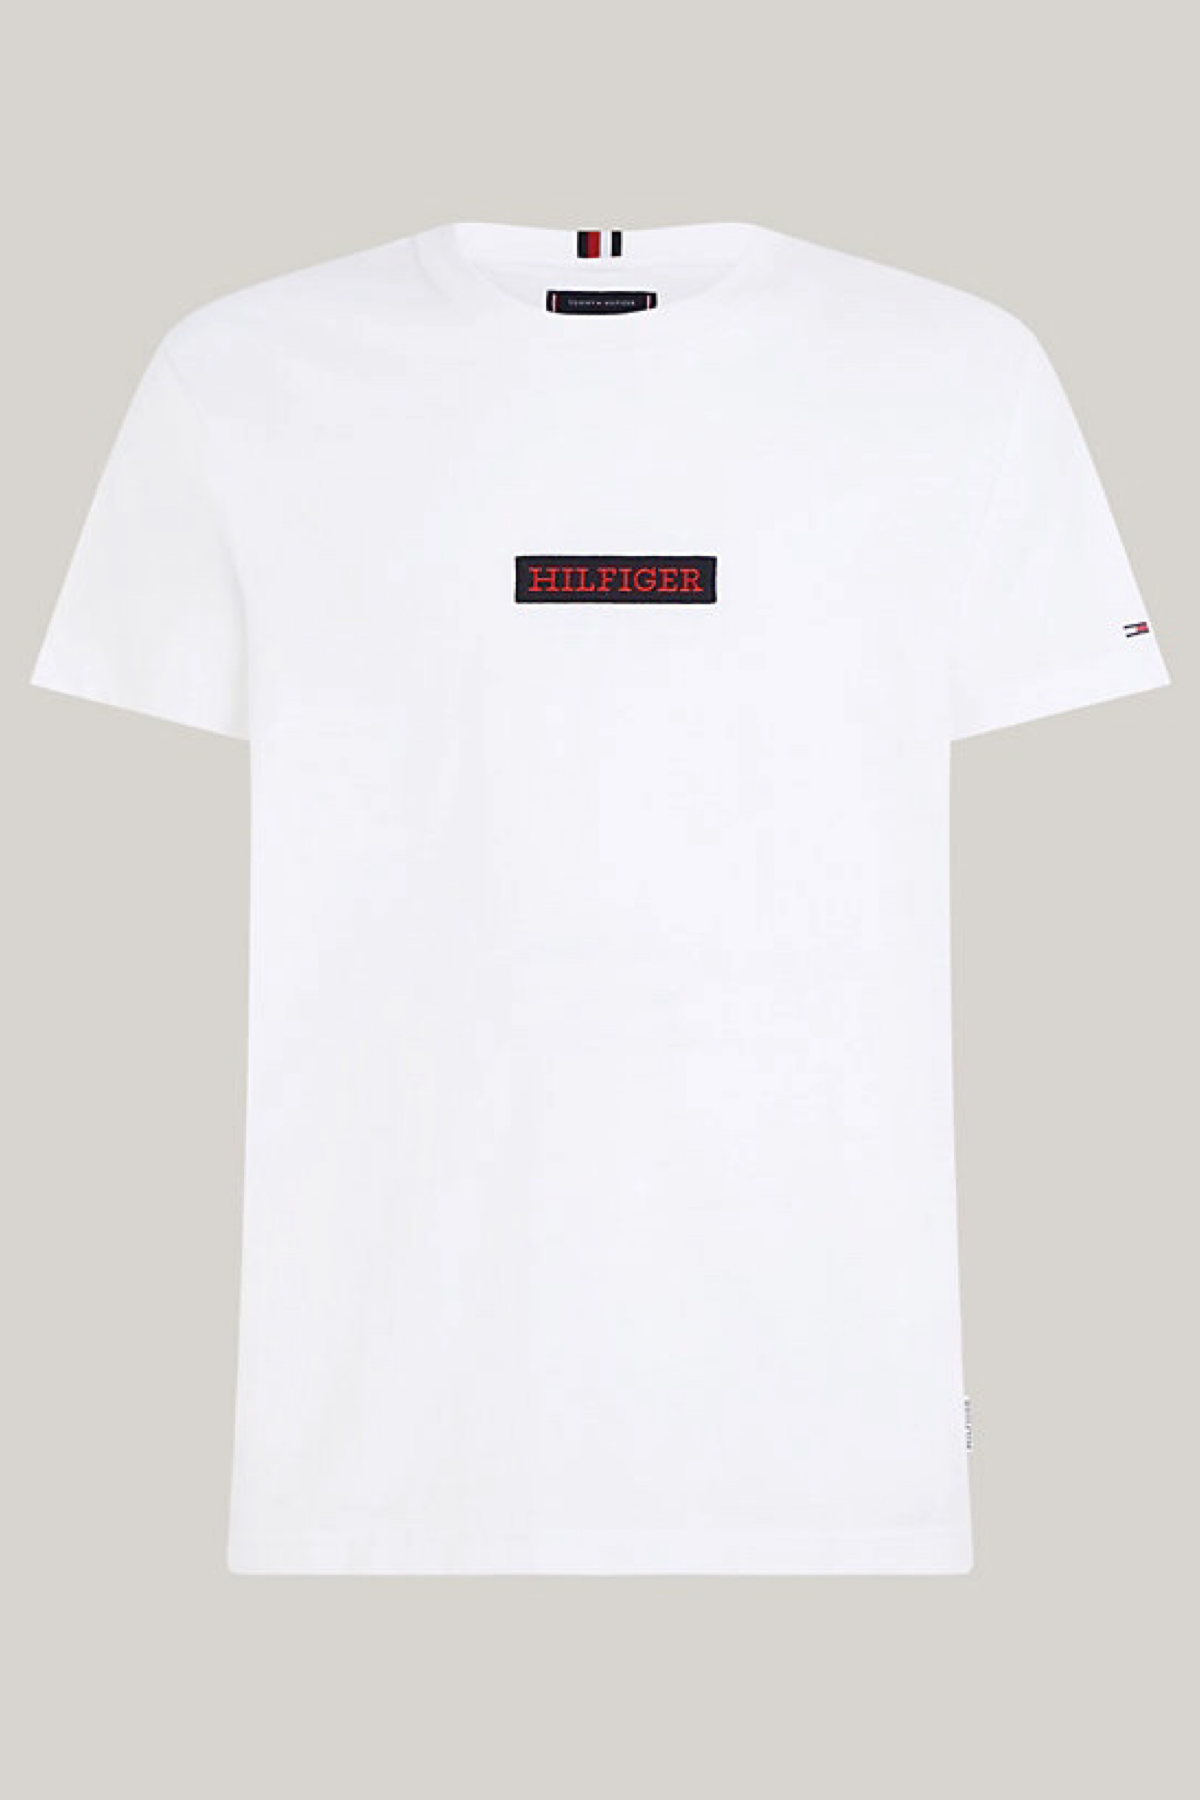 Tommy Hilfiger t-shirt monotype white 34373